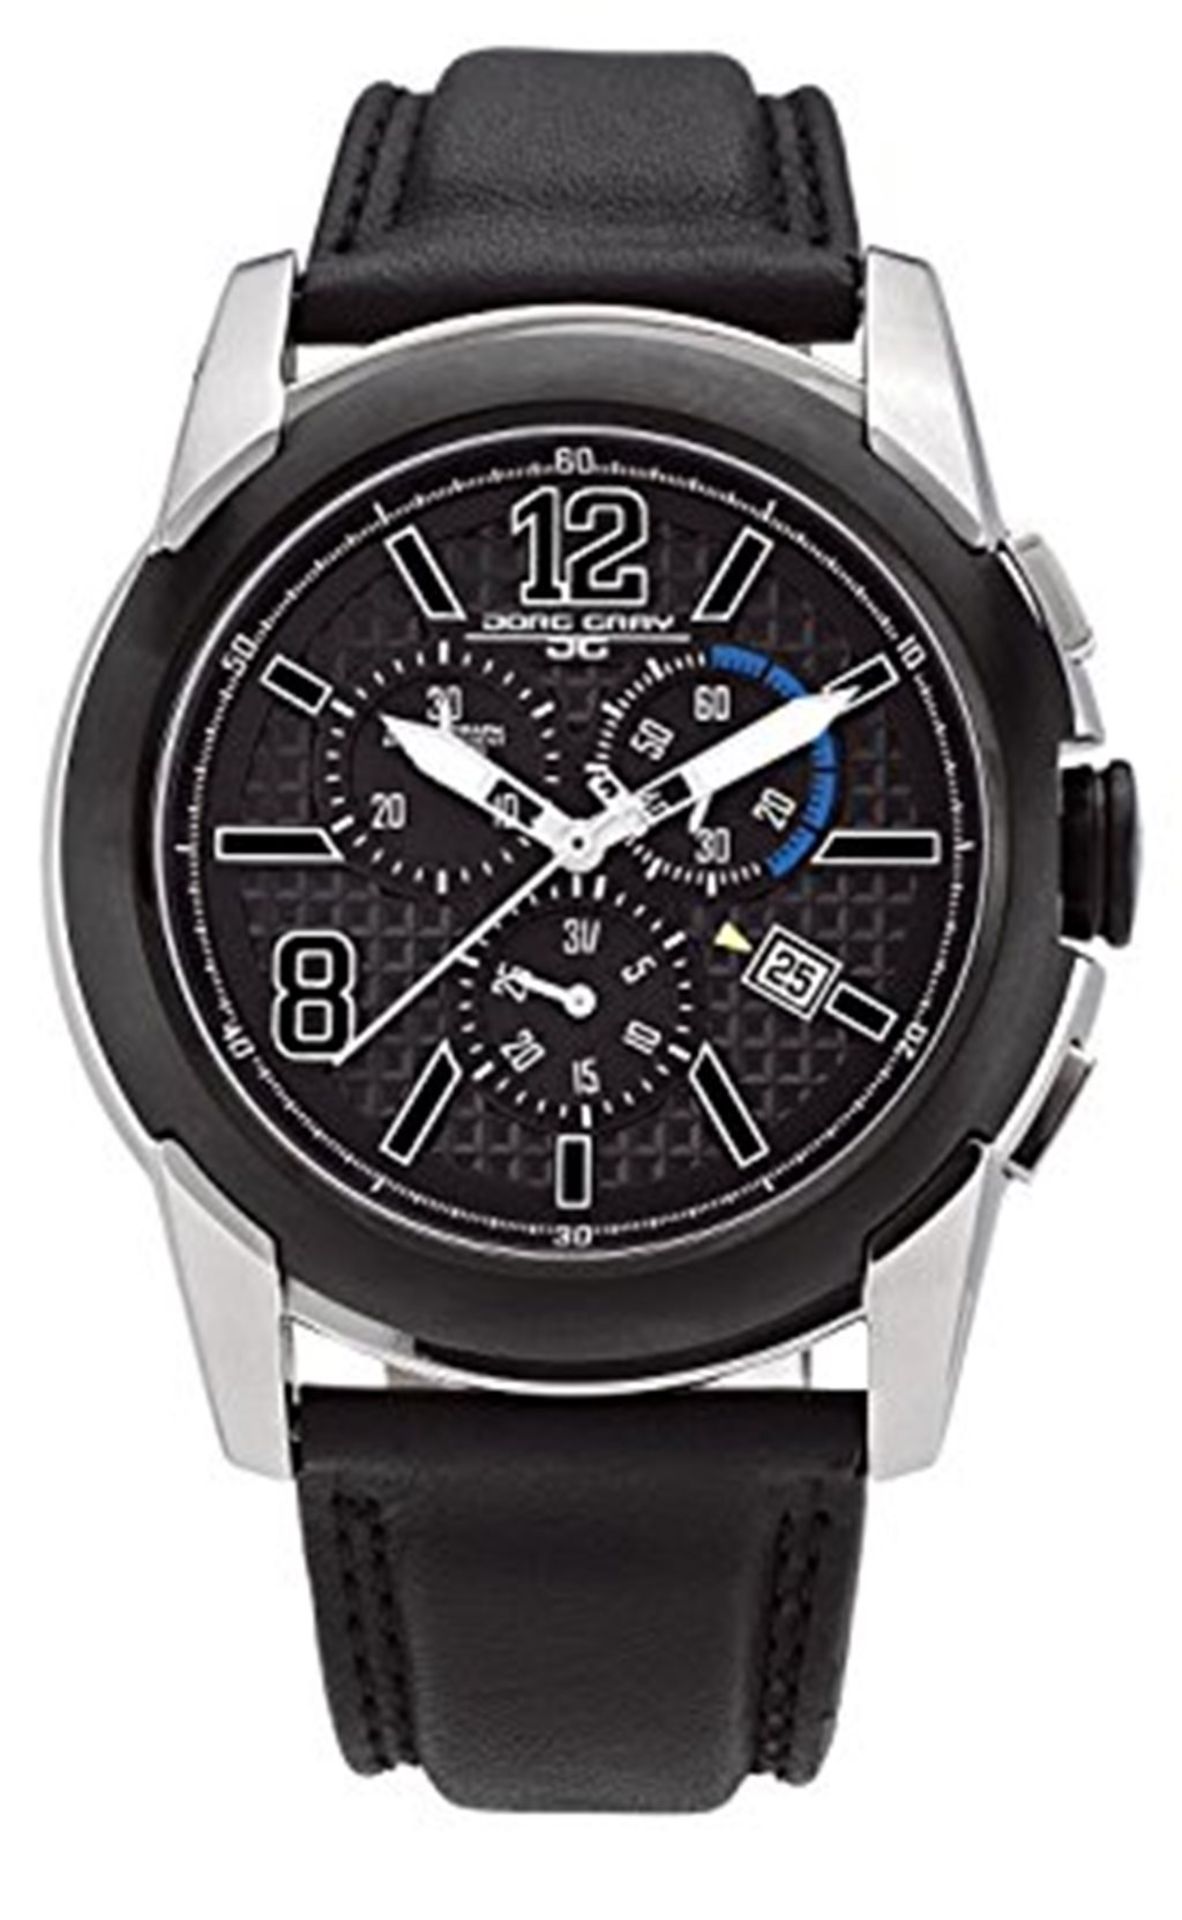 Jorg Gray Men's Quartz Analogue Watch JG9400-12 With Calf Leather Strap and Black Dial - Image 3 of 3